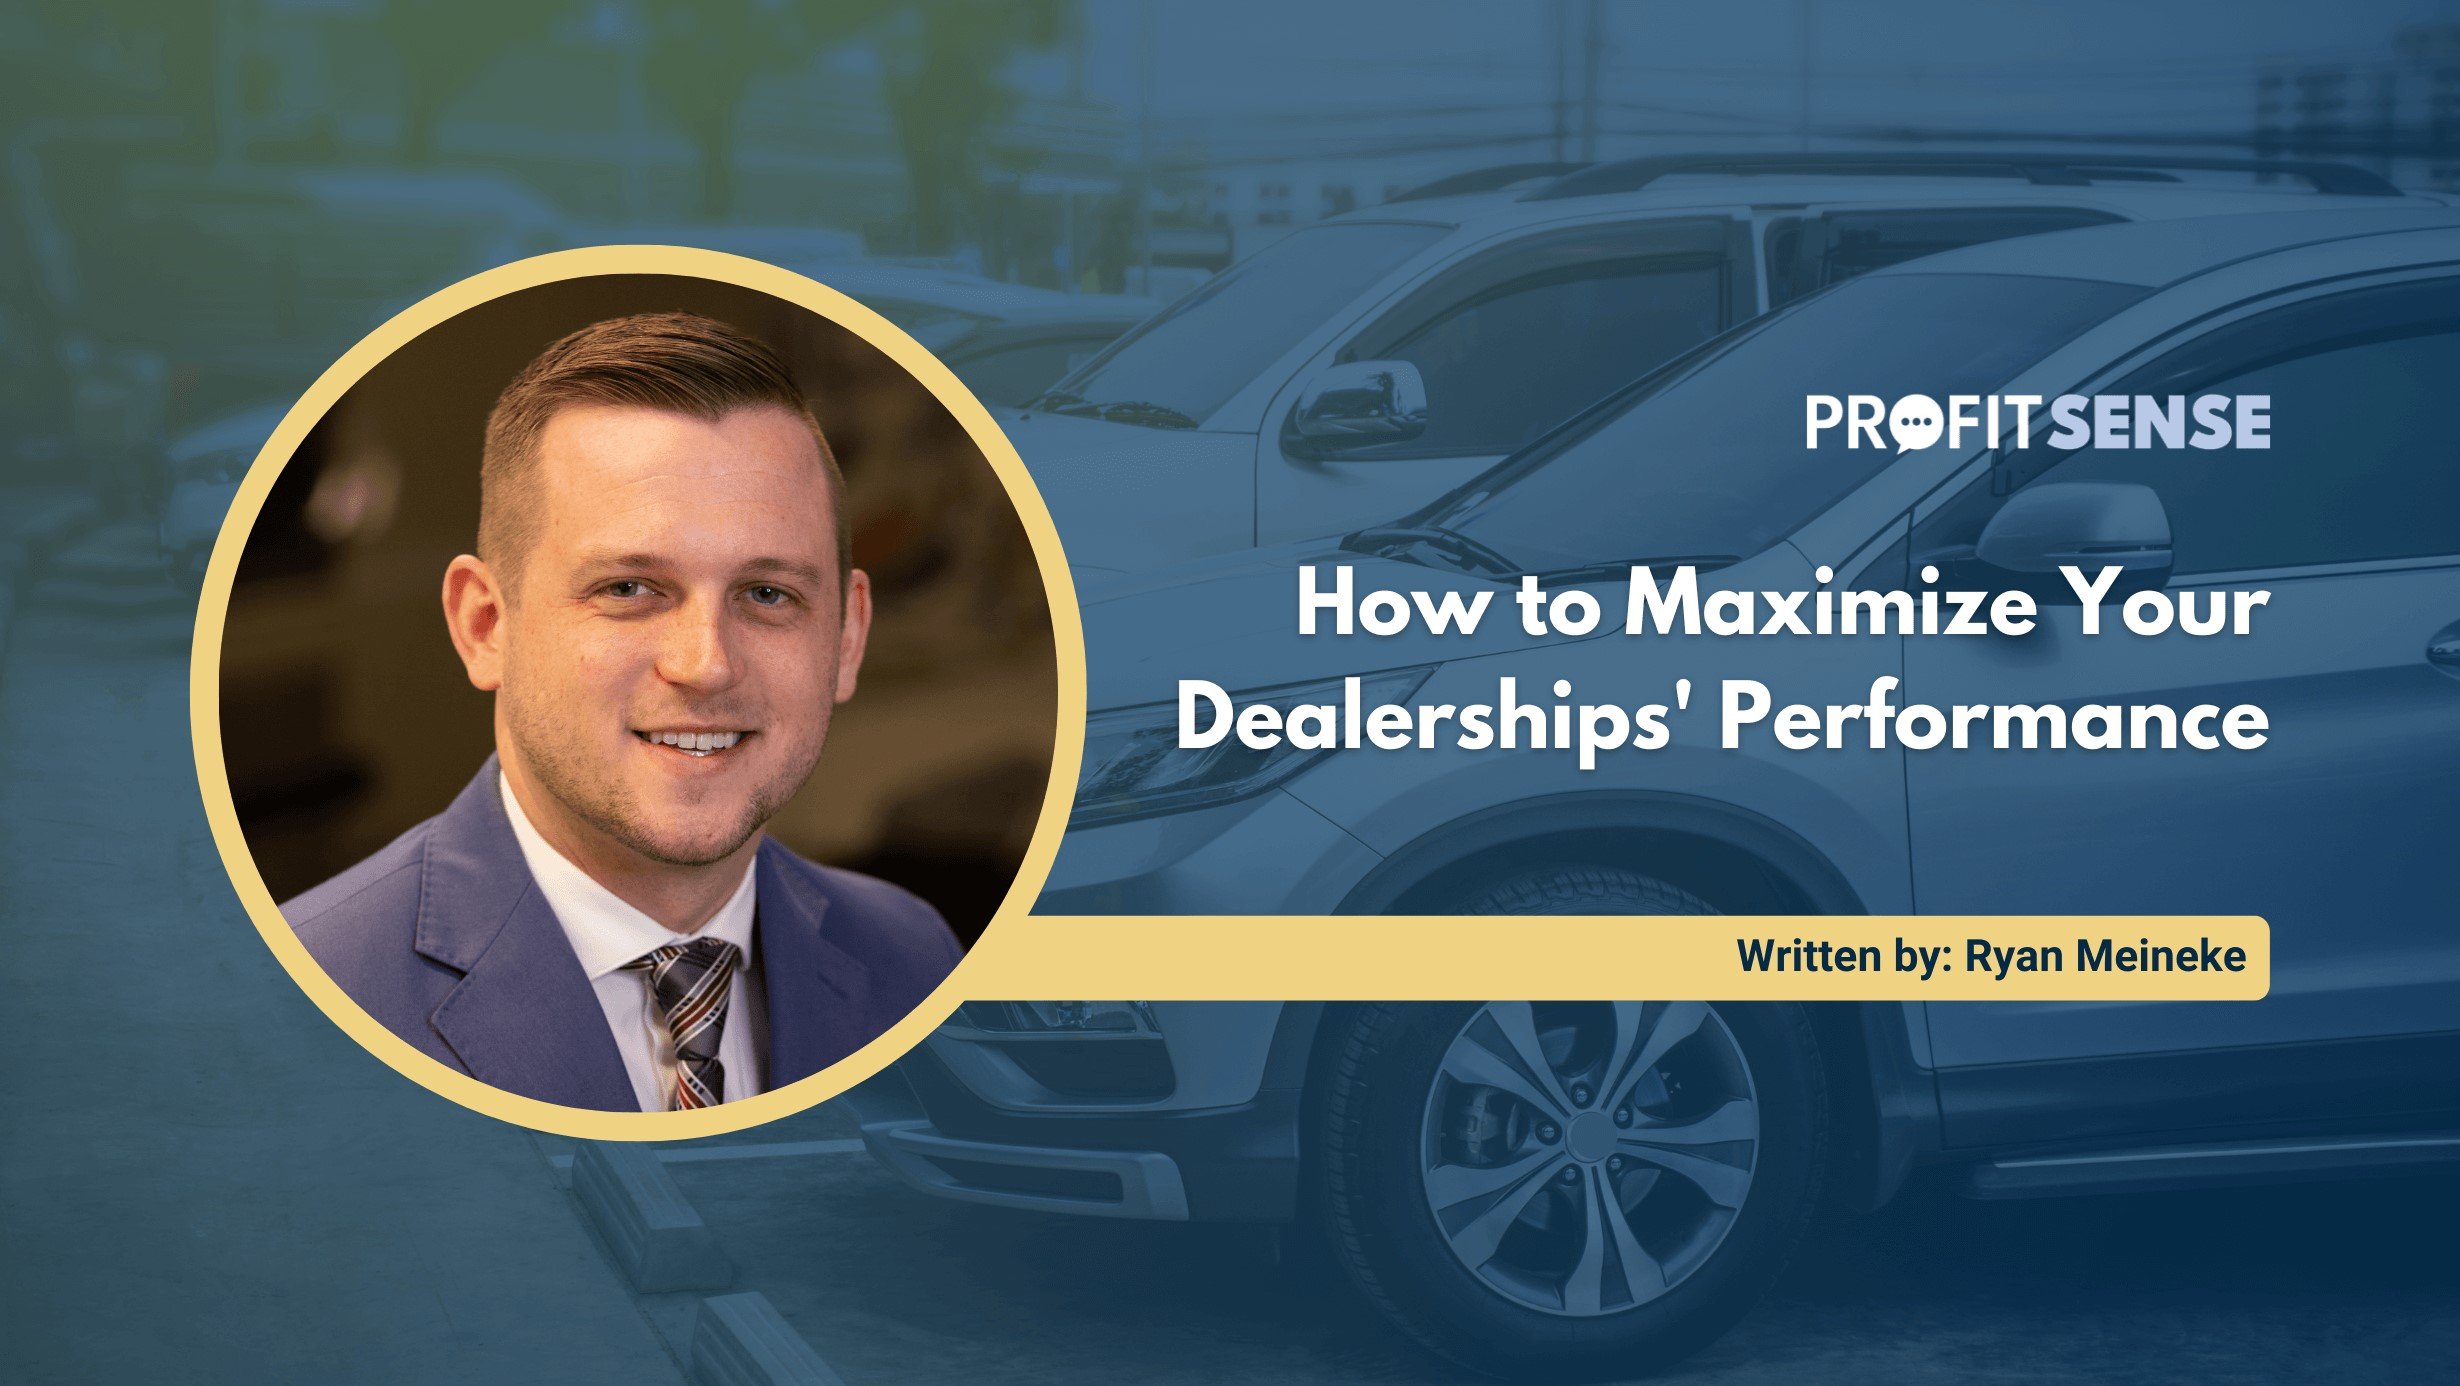 How to Maximize Your Dealerships' Performance